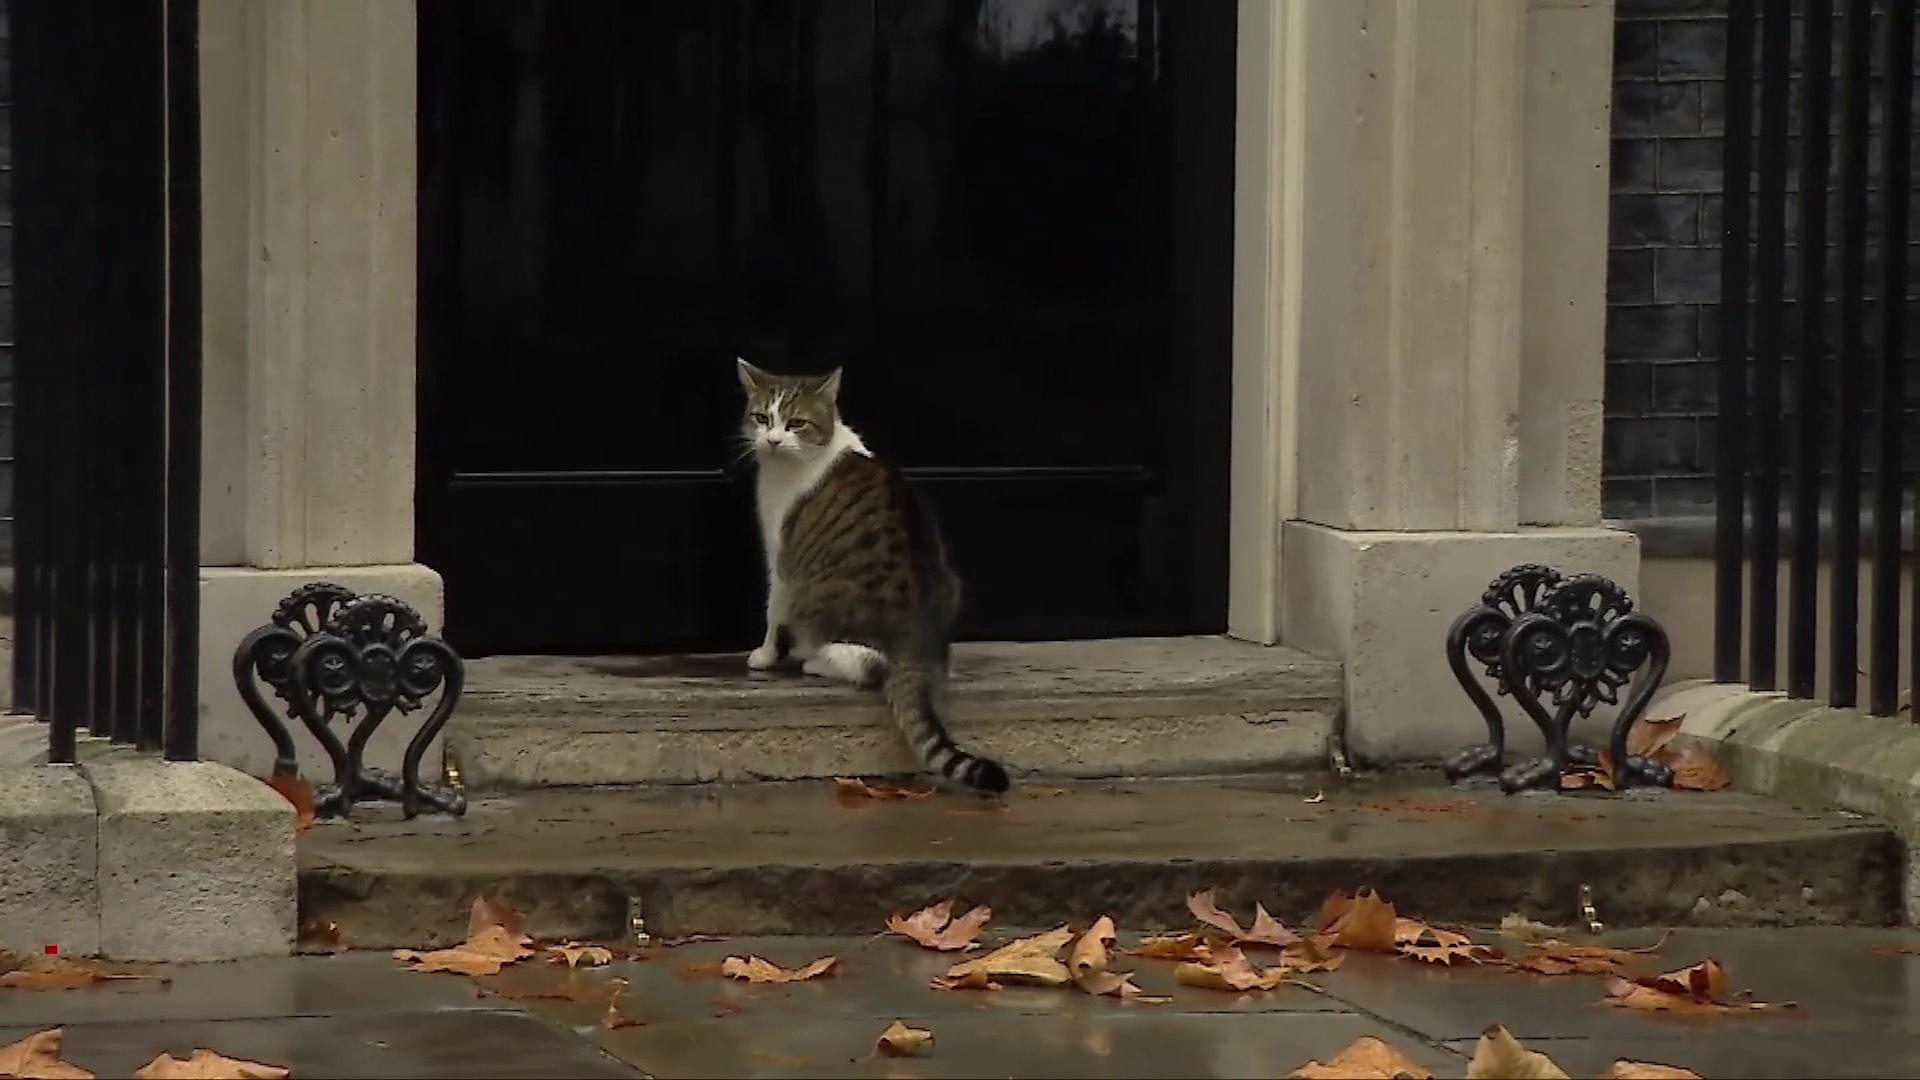 Downing Street S Larry The Cat Gets A Helping Hand From Police Bbc News